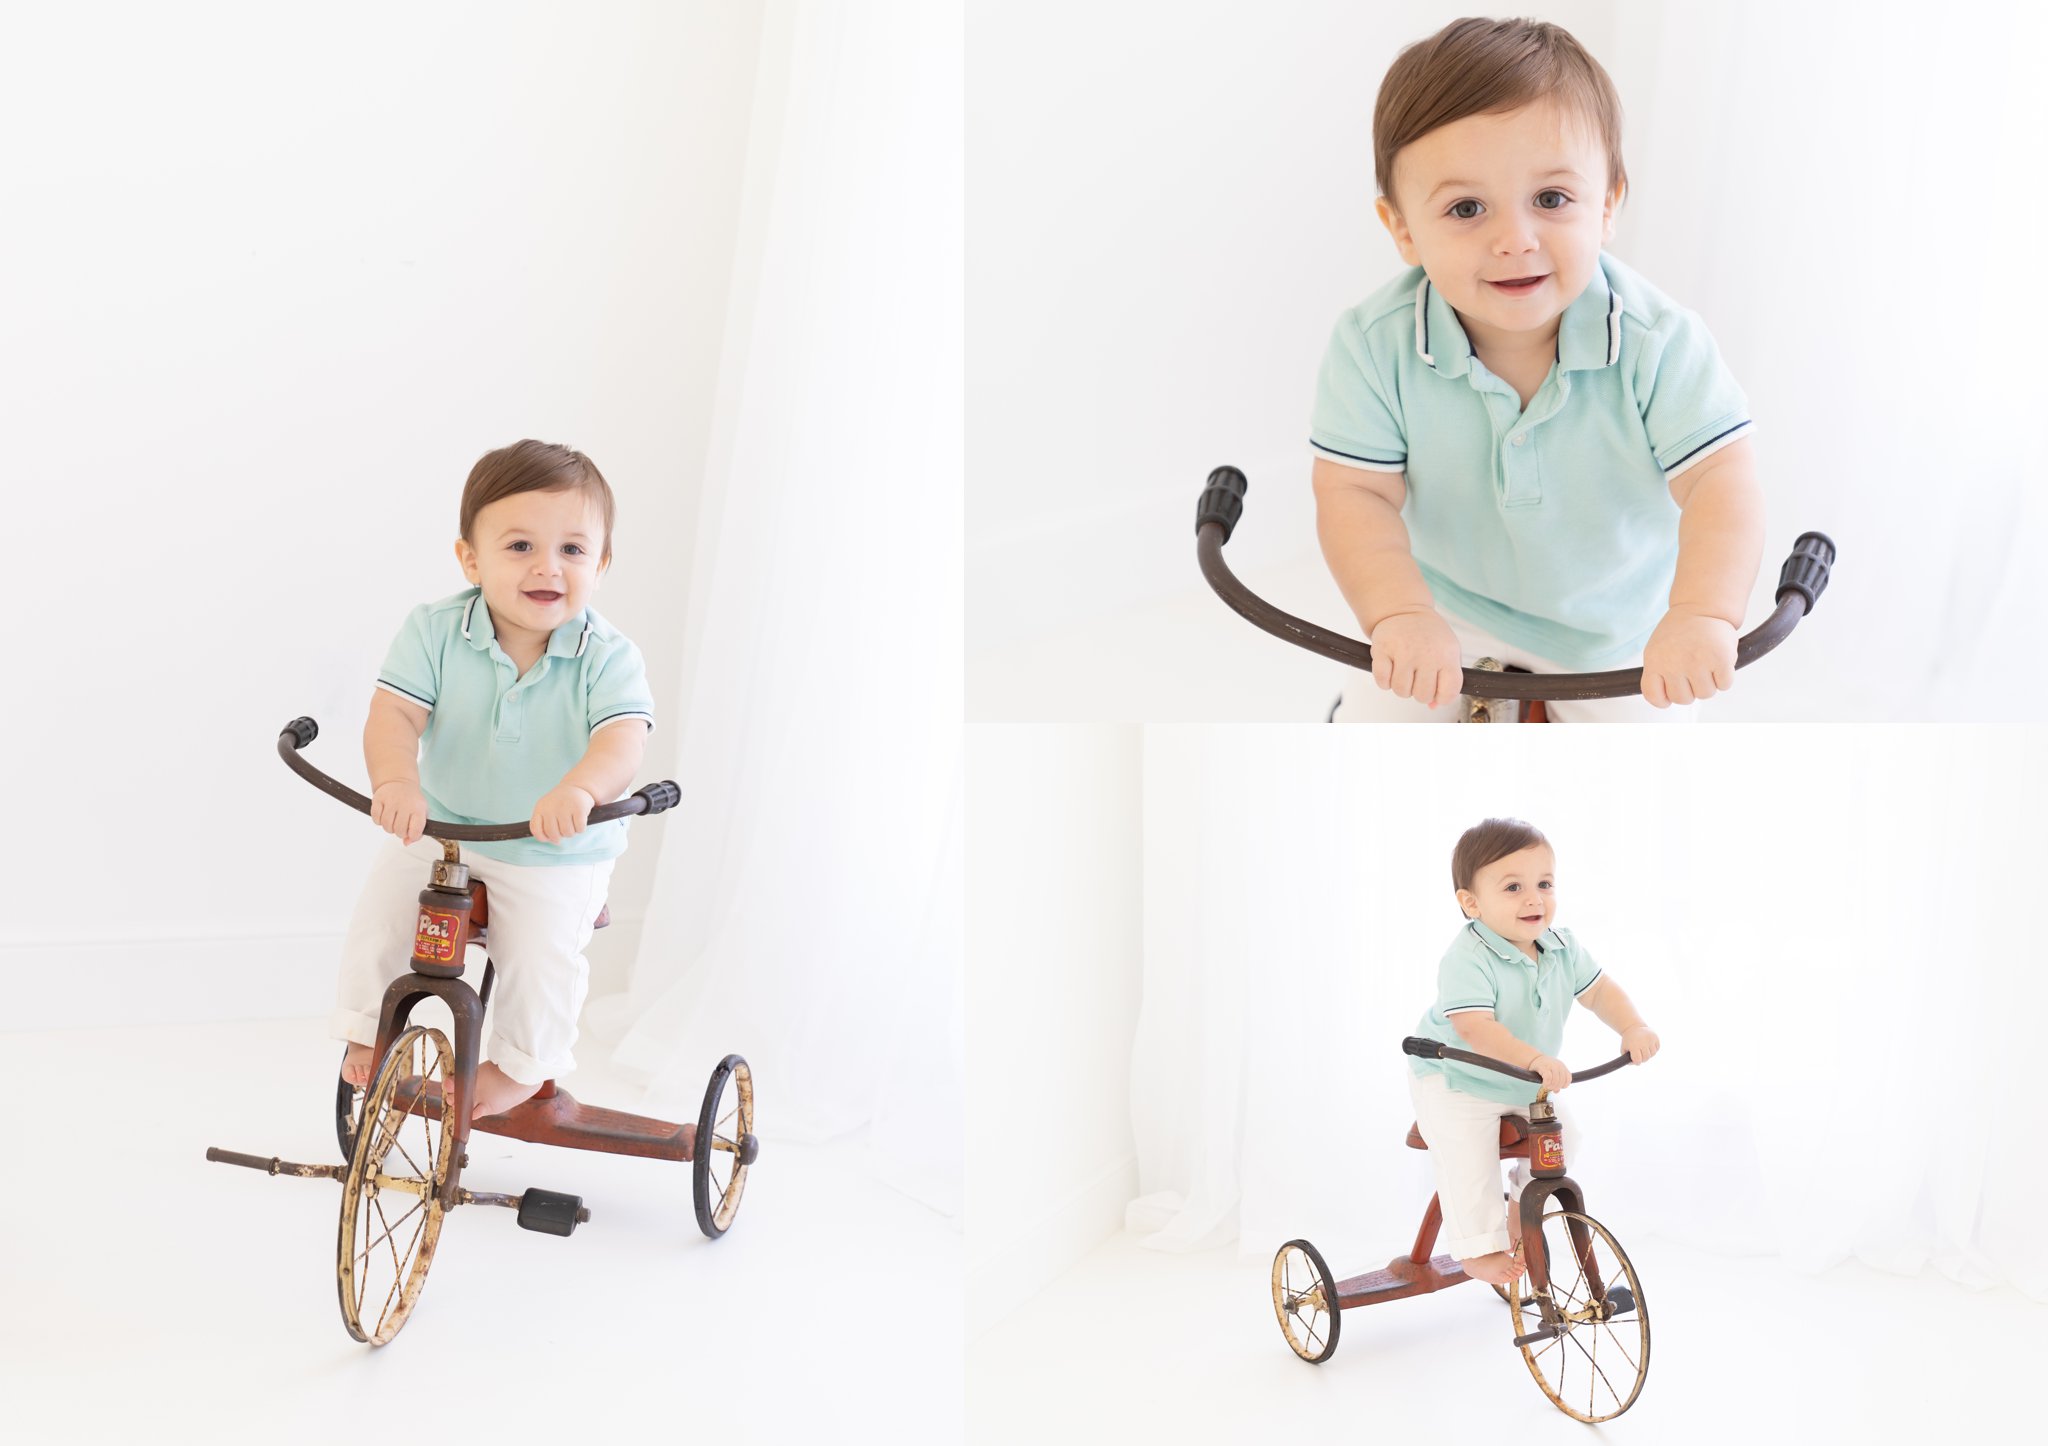 Baby boy being photographed on old tricycle .